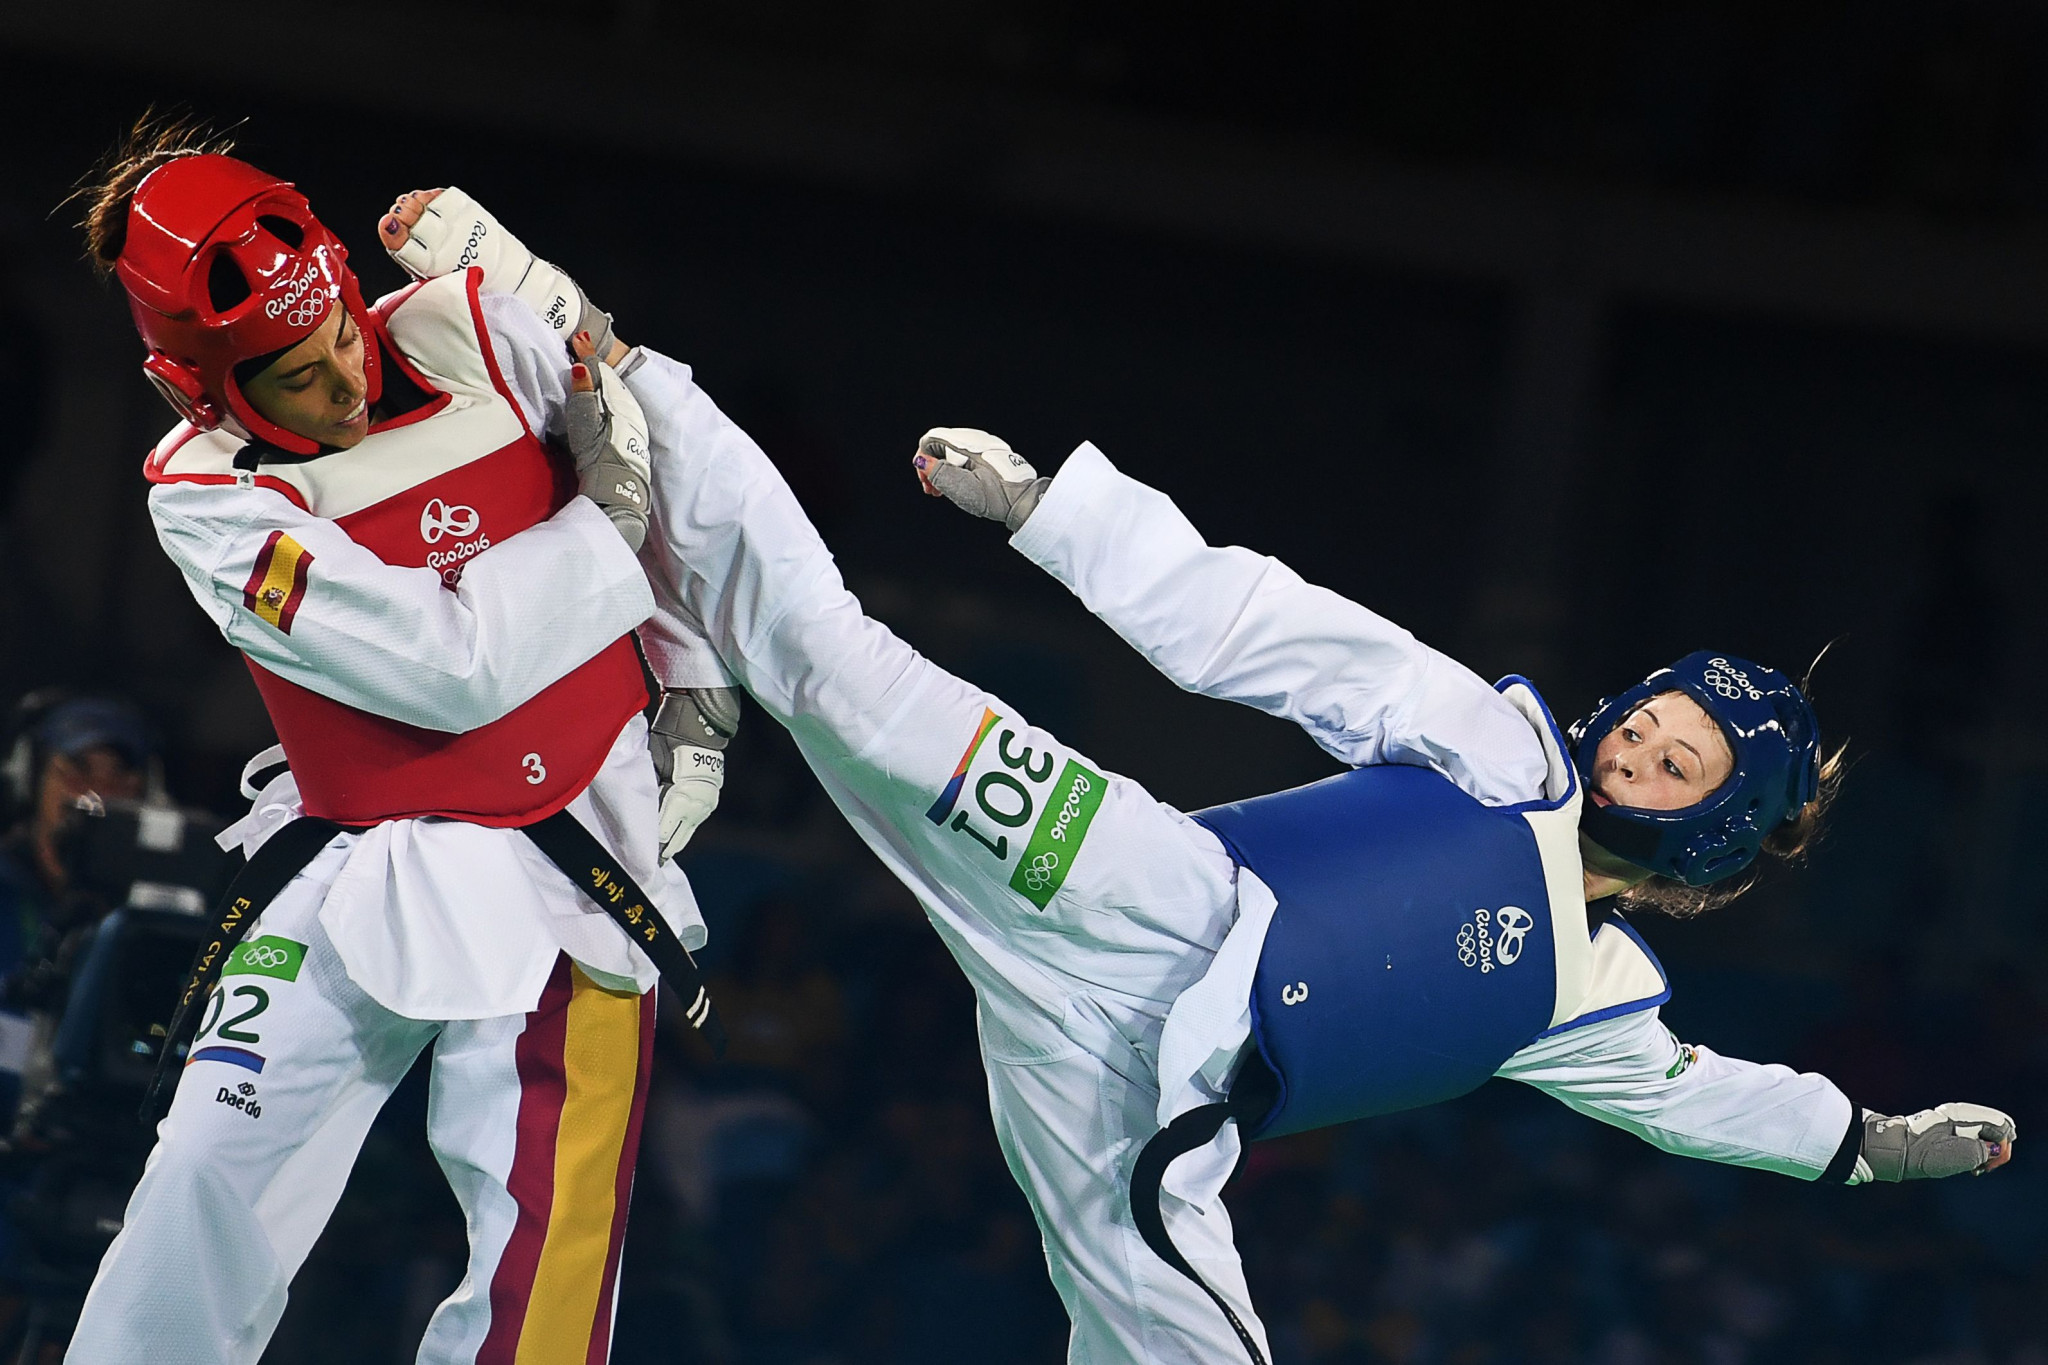 Double Olympic champion Jade Jones is among the British athletes set to compete at the World Taekwondo Grand Prix ©Getty Images